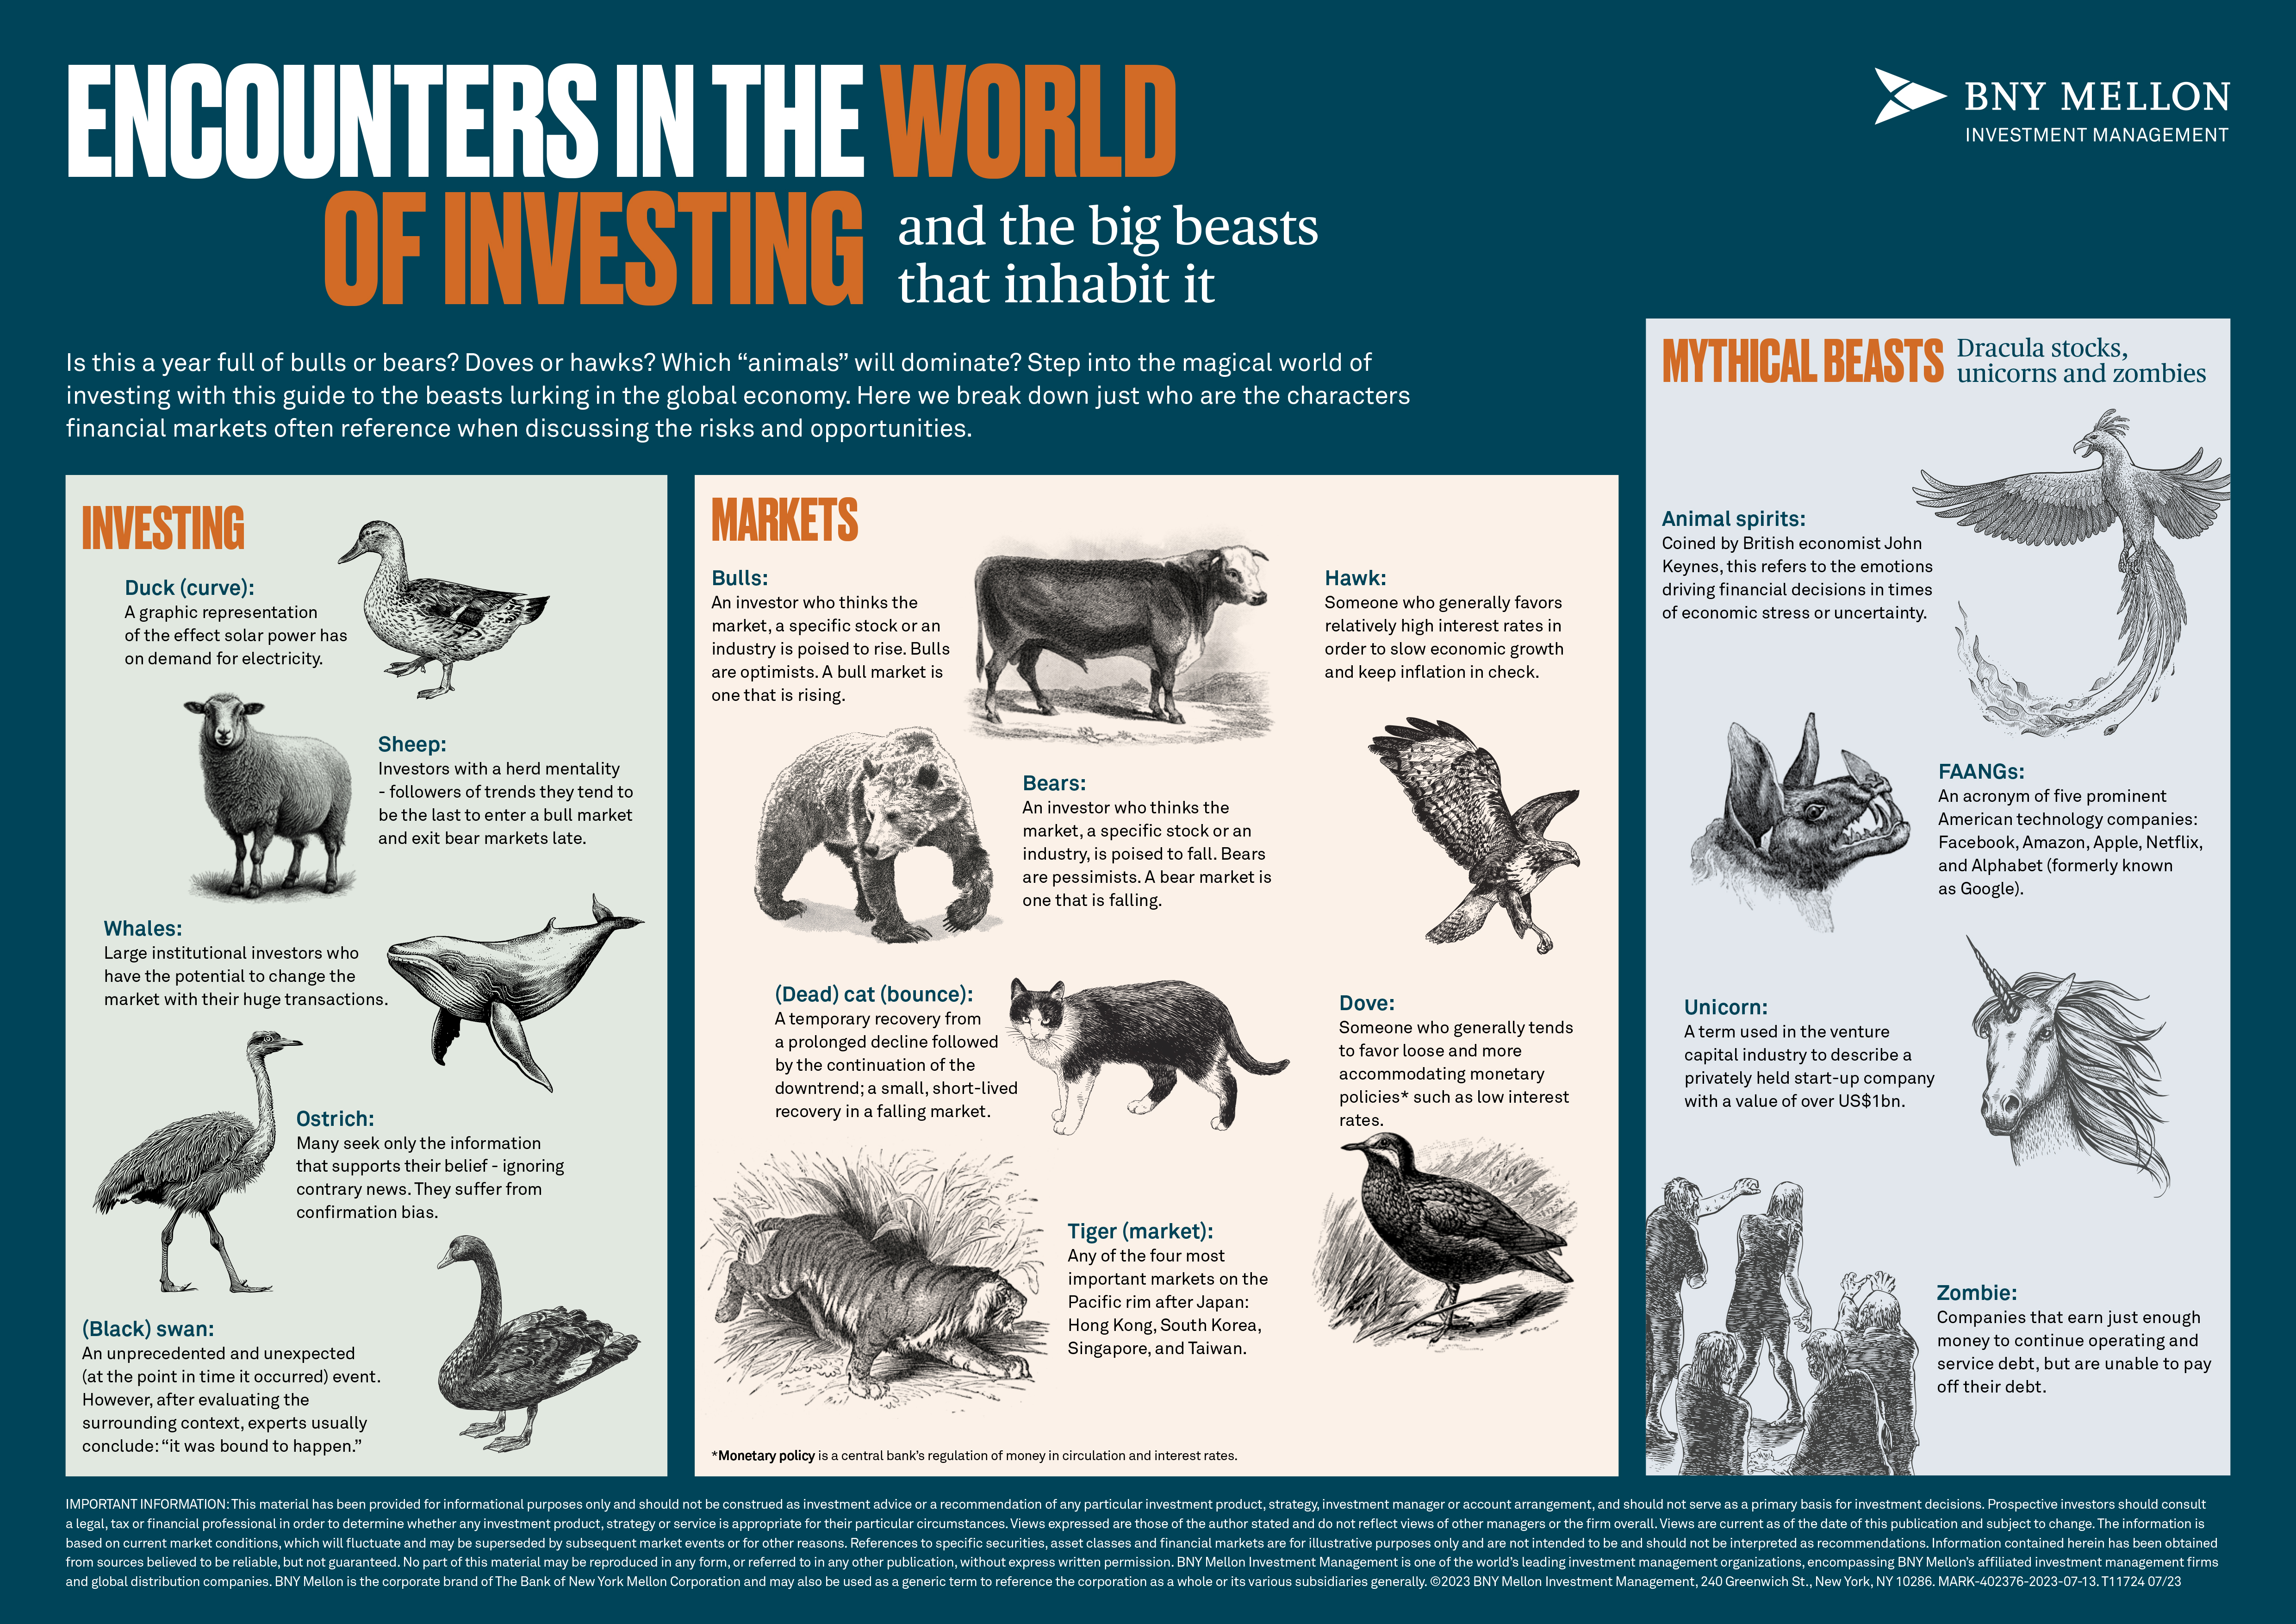 Infographic using animal metaphors to describe investing and financial markets
